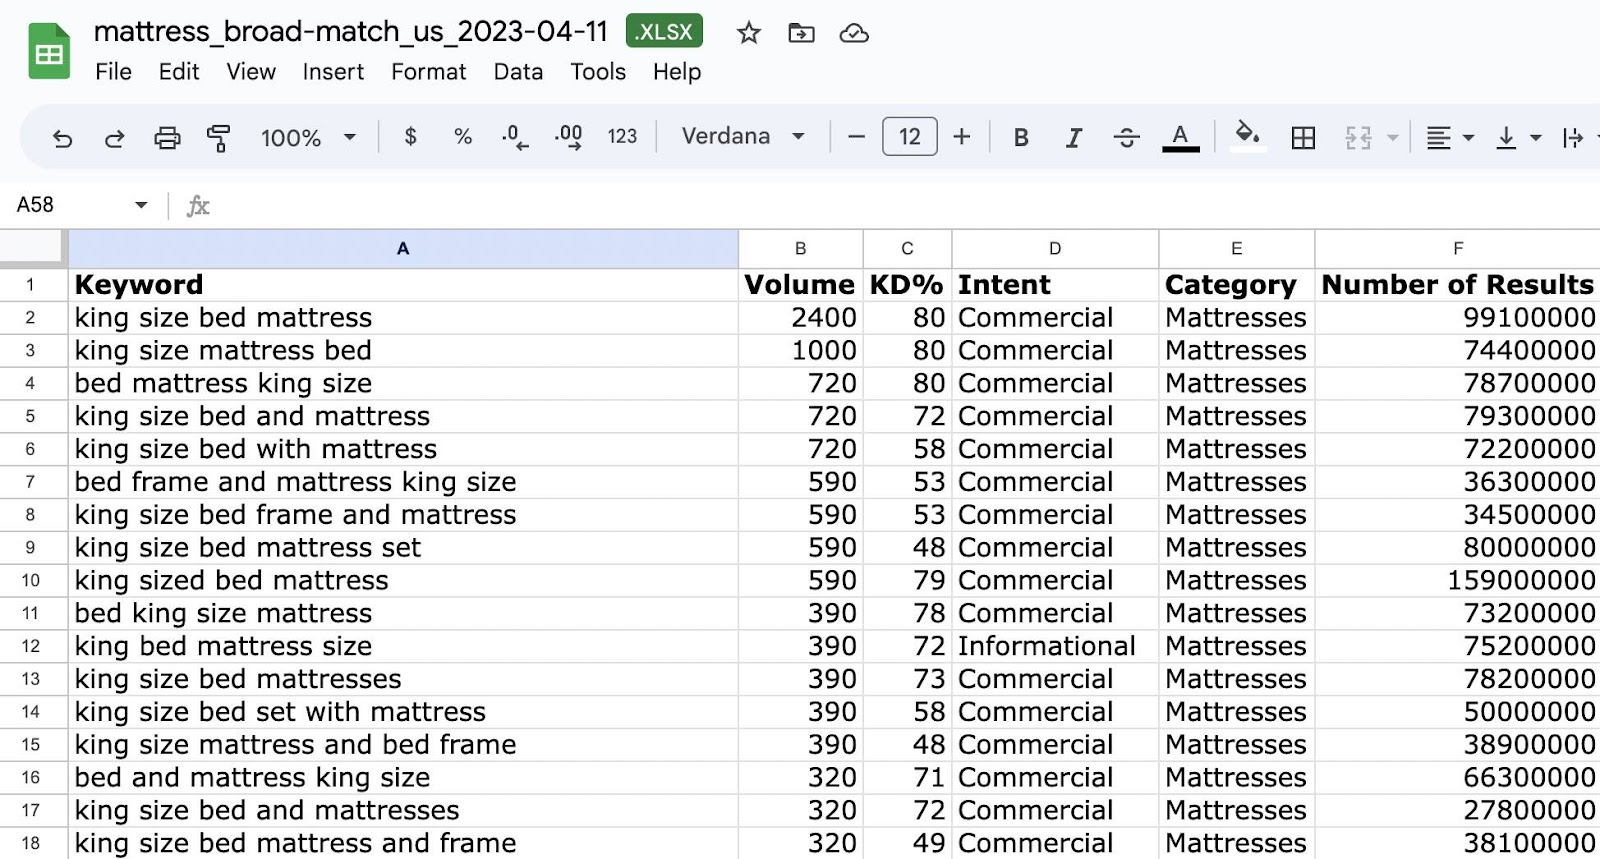 mattress broad match exported to excel sheet